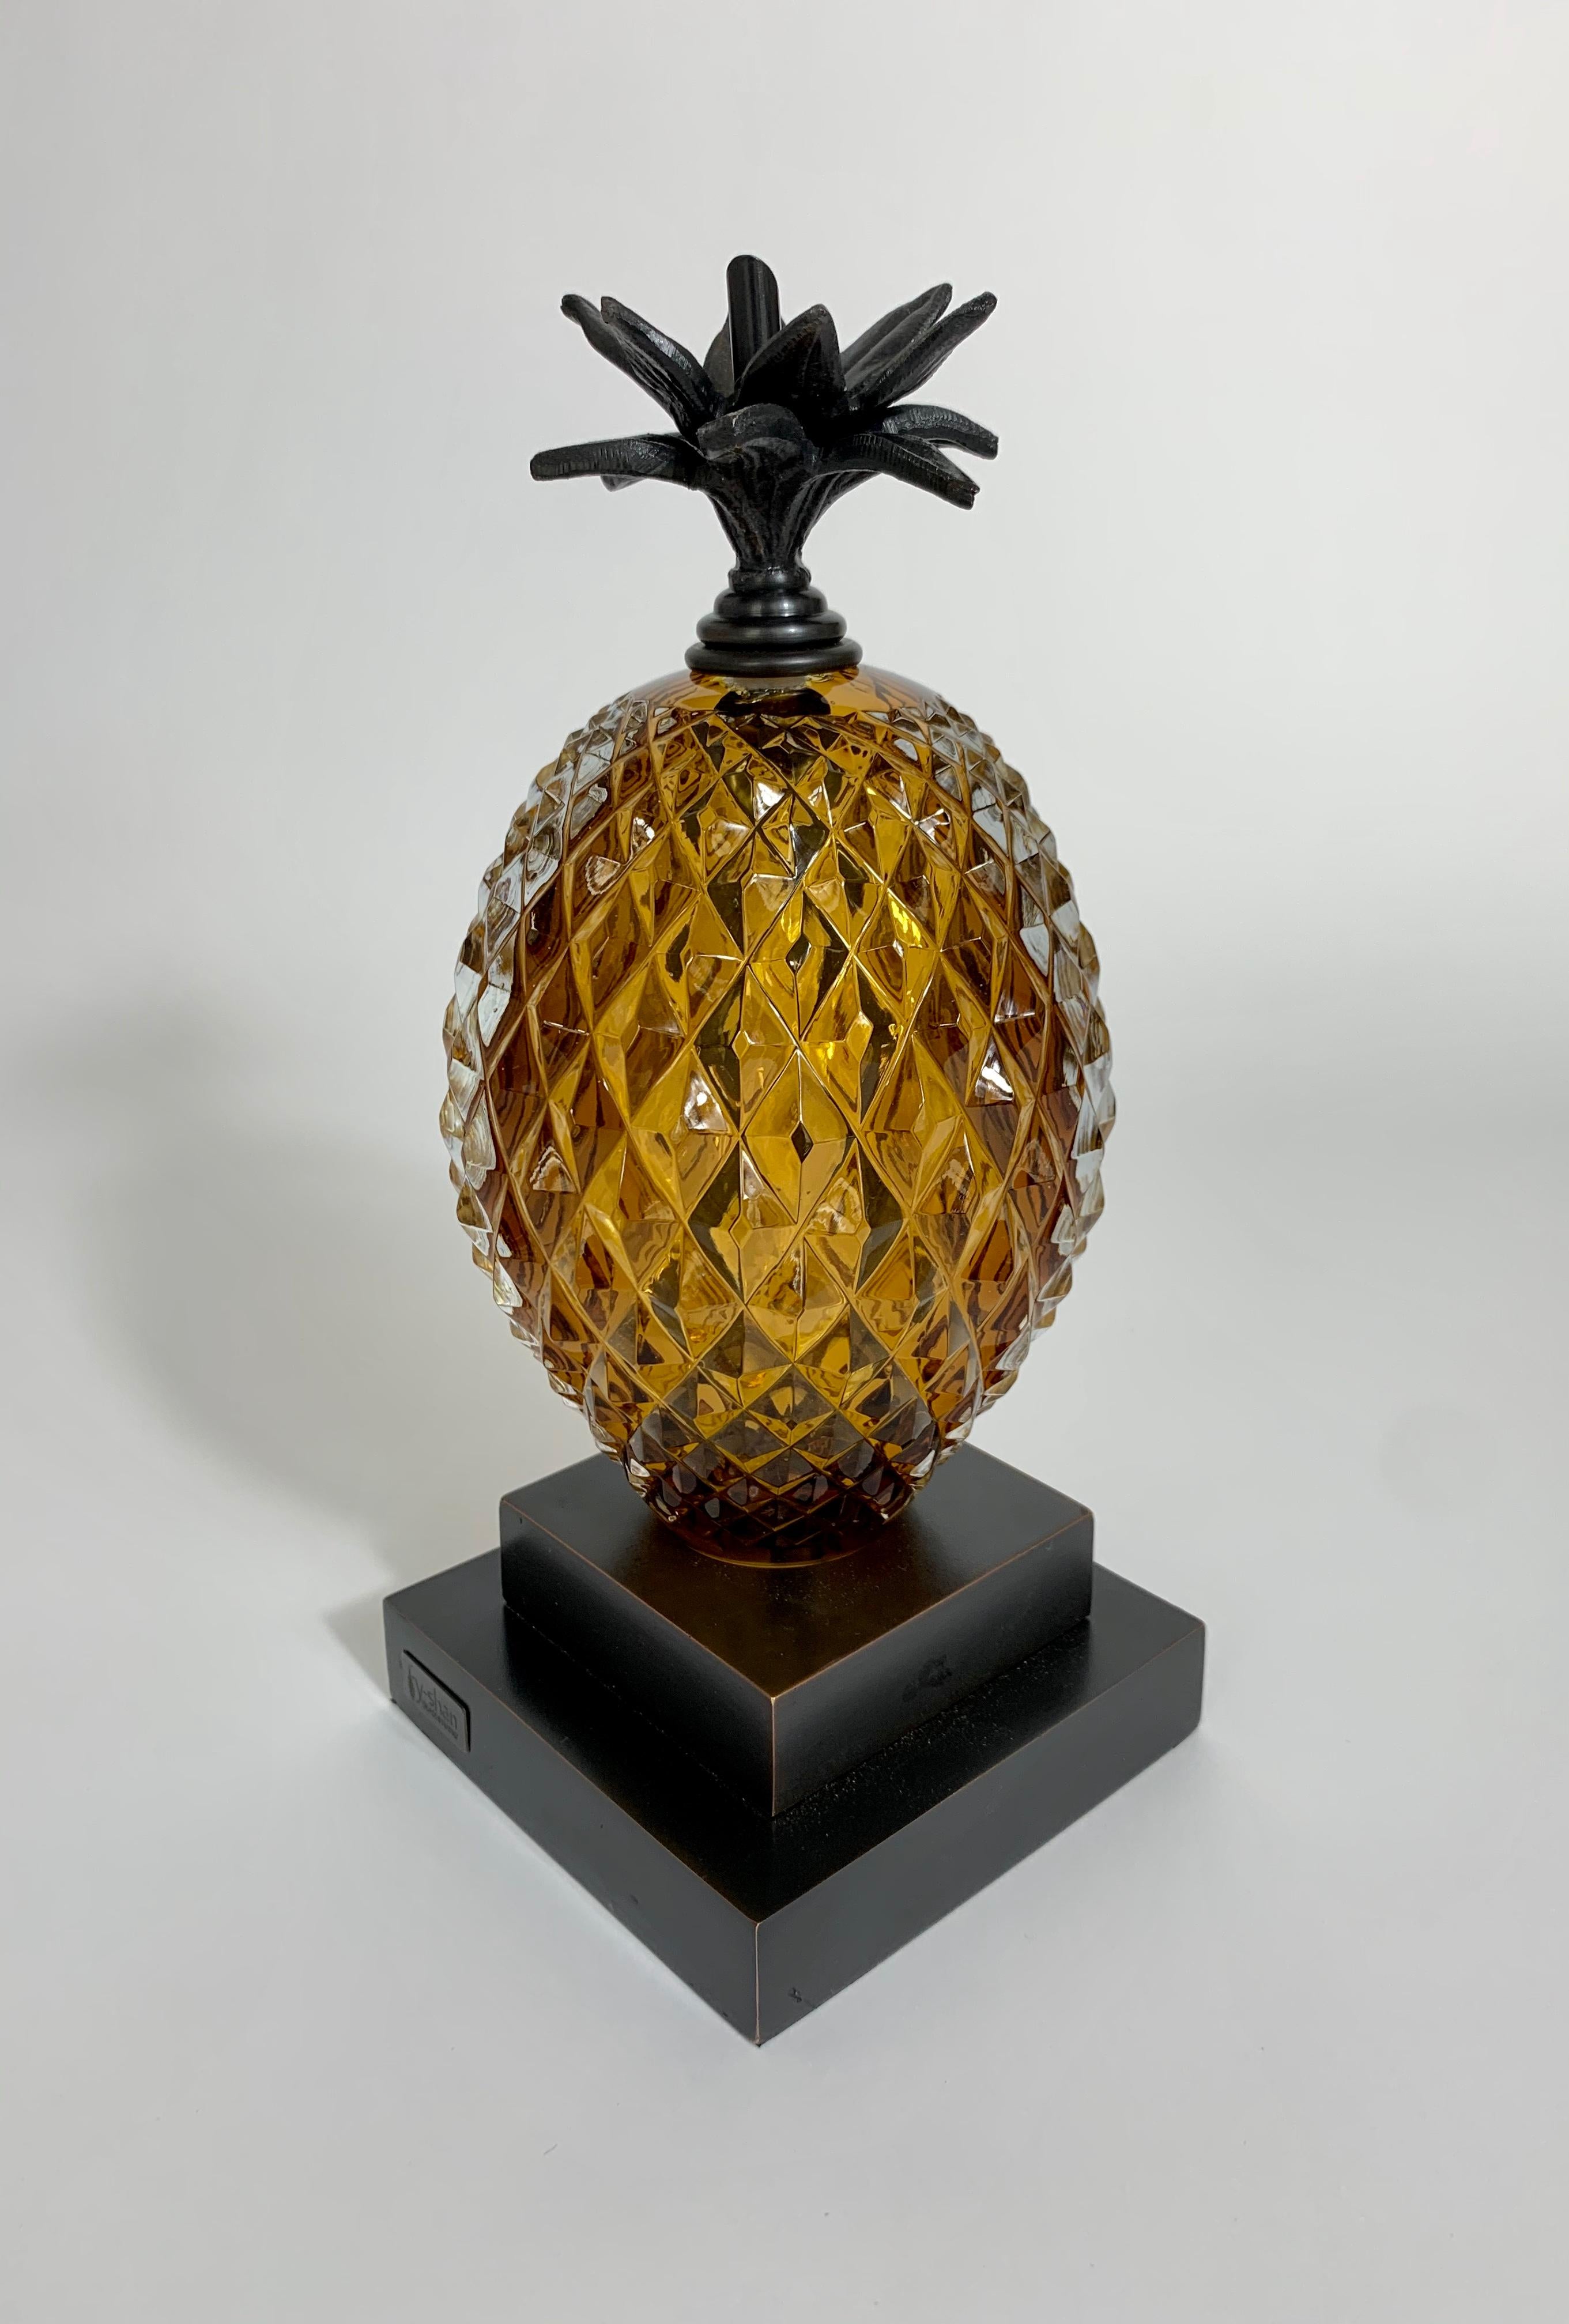 Cast Vintage Inspired Contemporary Pineapple Glass Bookend in Amber